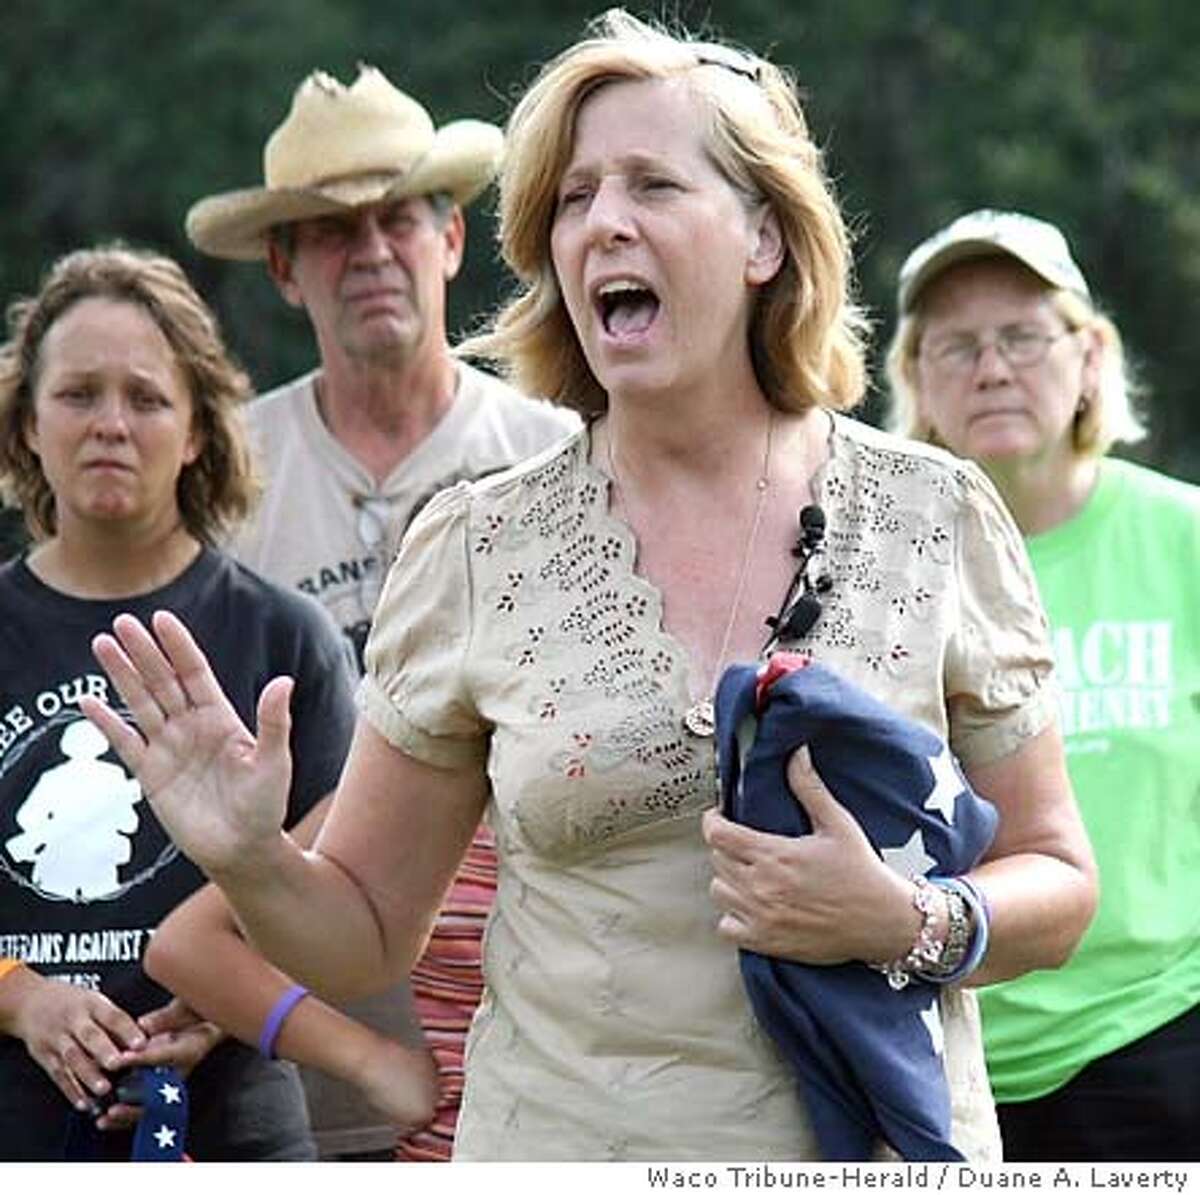 Cindy Sheehan says she'll run against Speaker of the House Nancy Pelosi if the San Francisco representative won't push to impeach the president. Waco Tribune-Herald photo by Duane A. Laverty